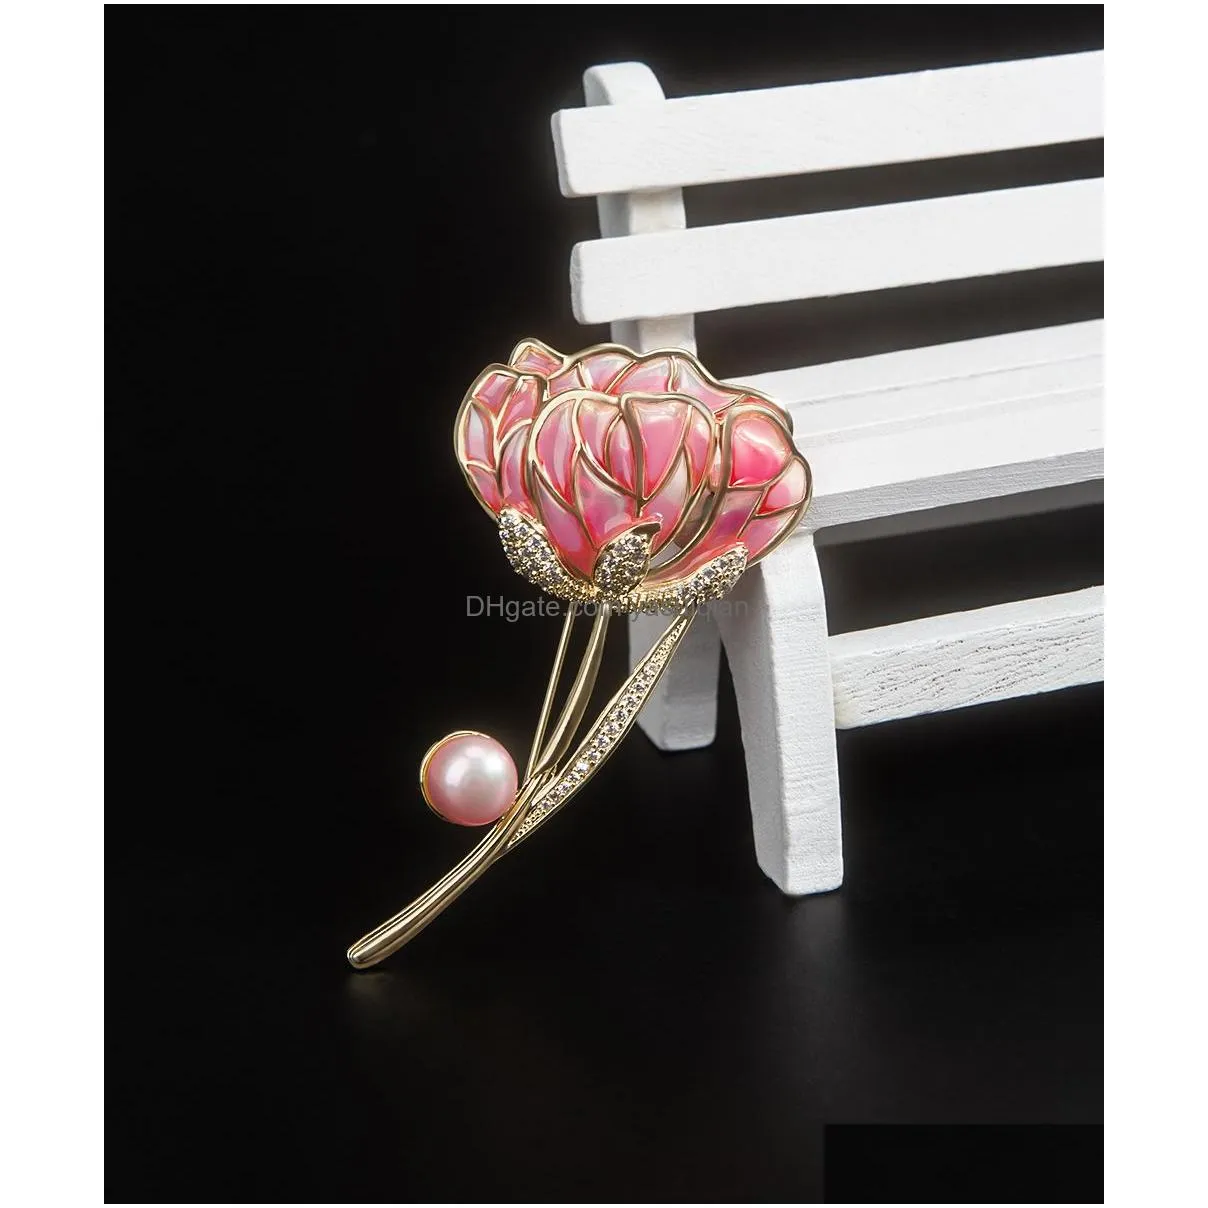 Pins, Brooches Luxury Flower Brooch For Women With Pink Imitation Pearl Banquet Jewelry Cor Pin Clothing Accessories Birthday Gift Dr Dh5Wz